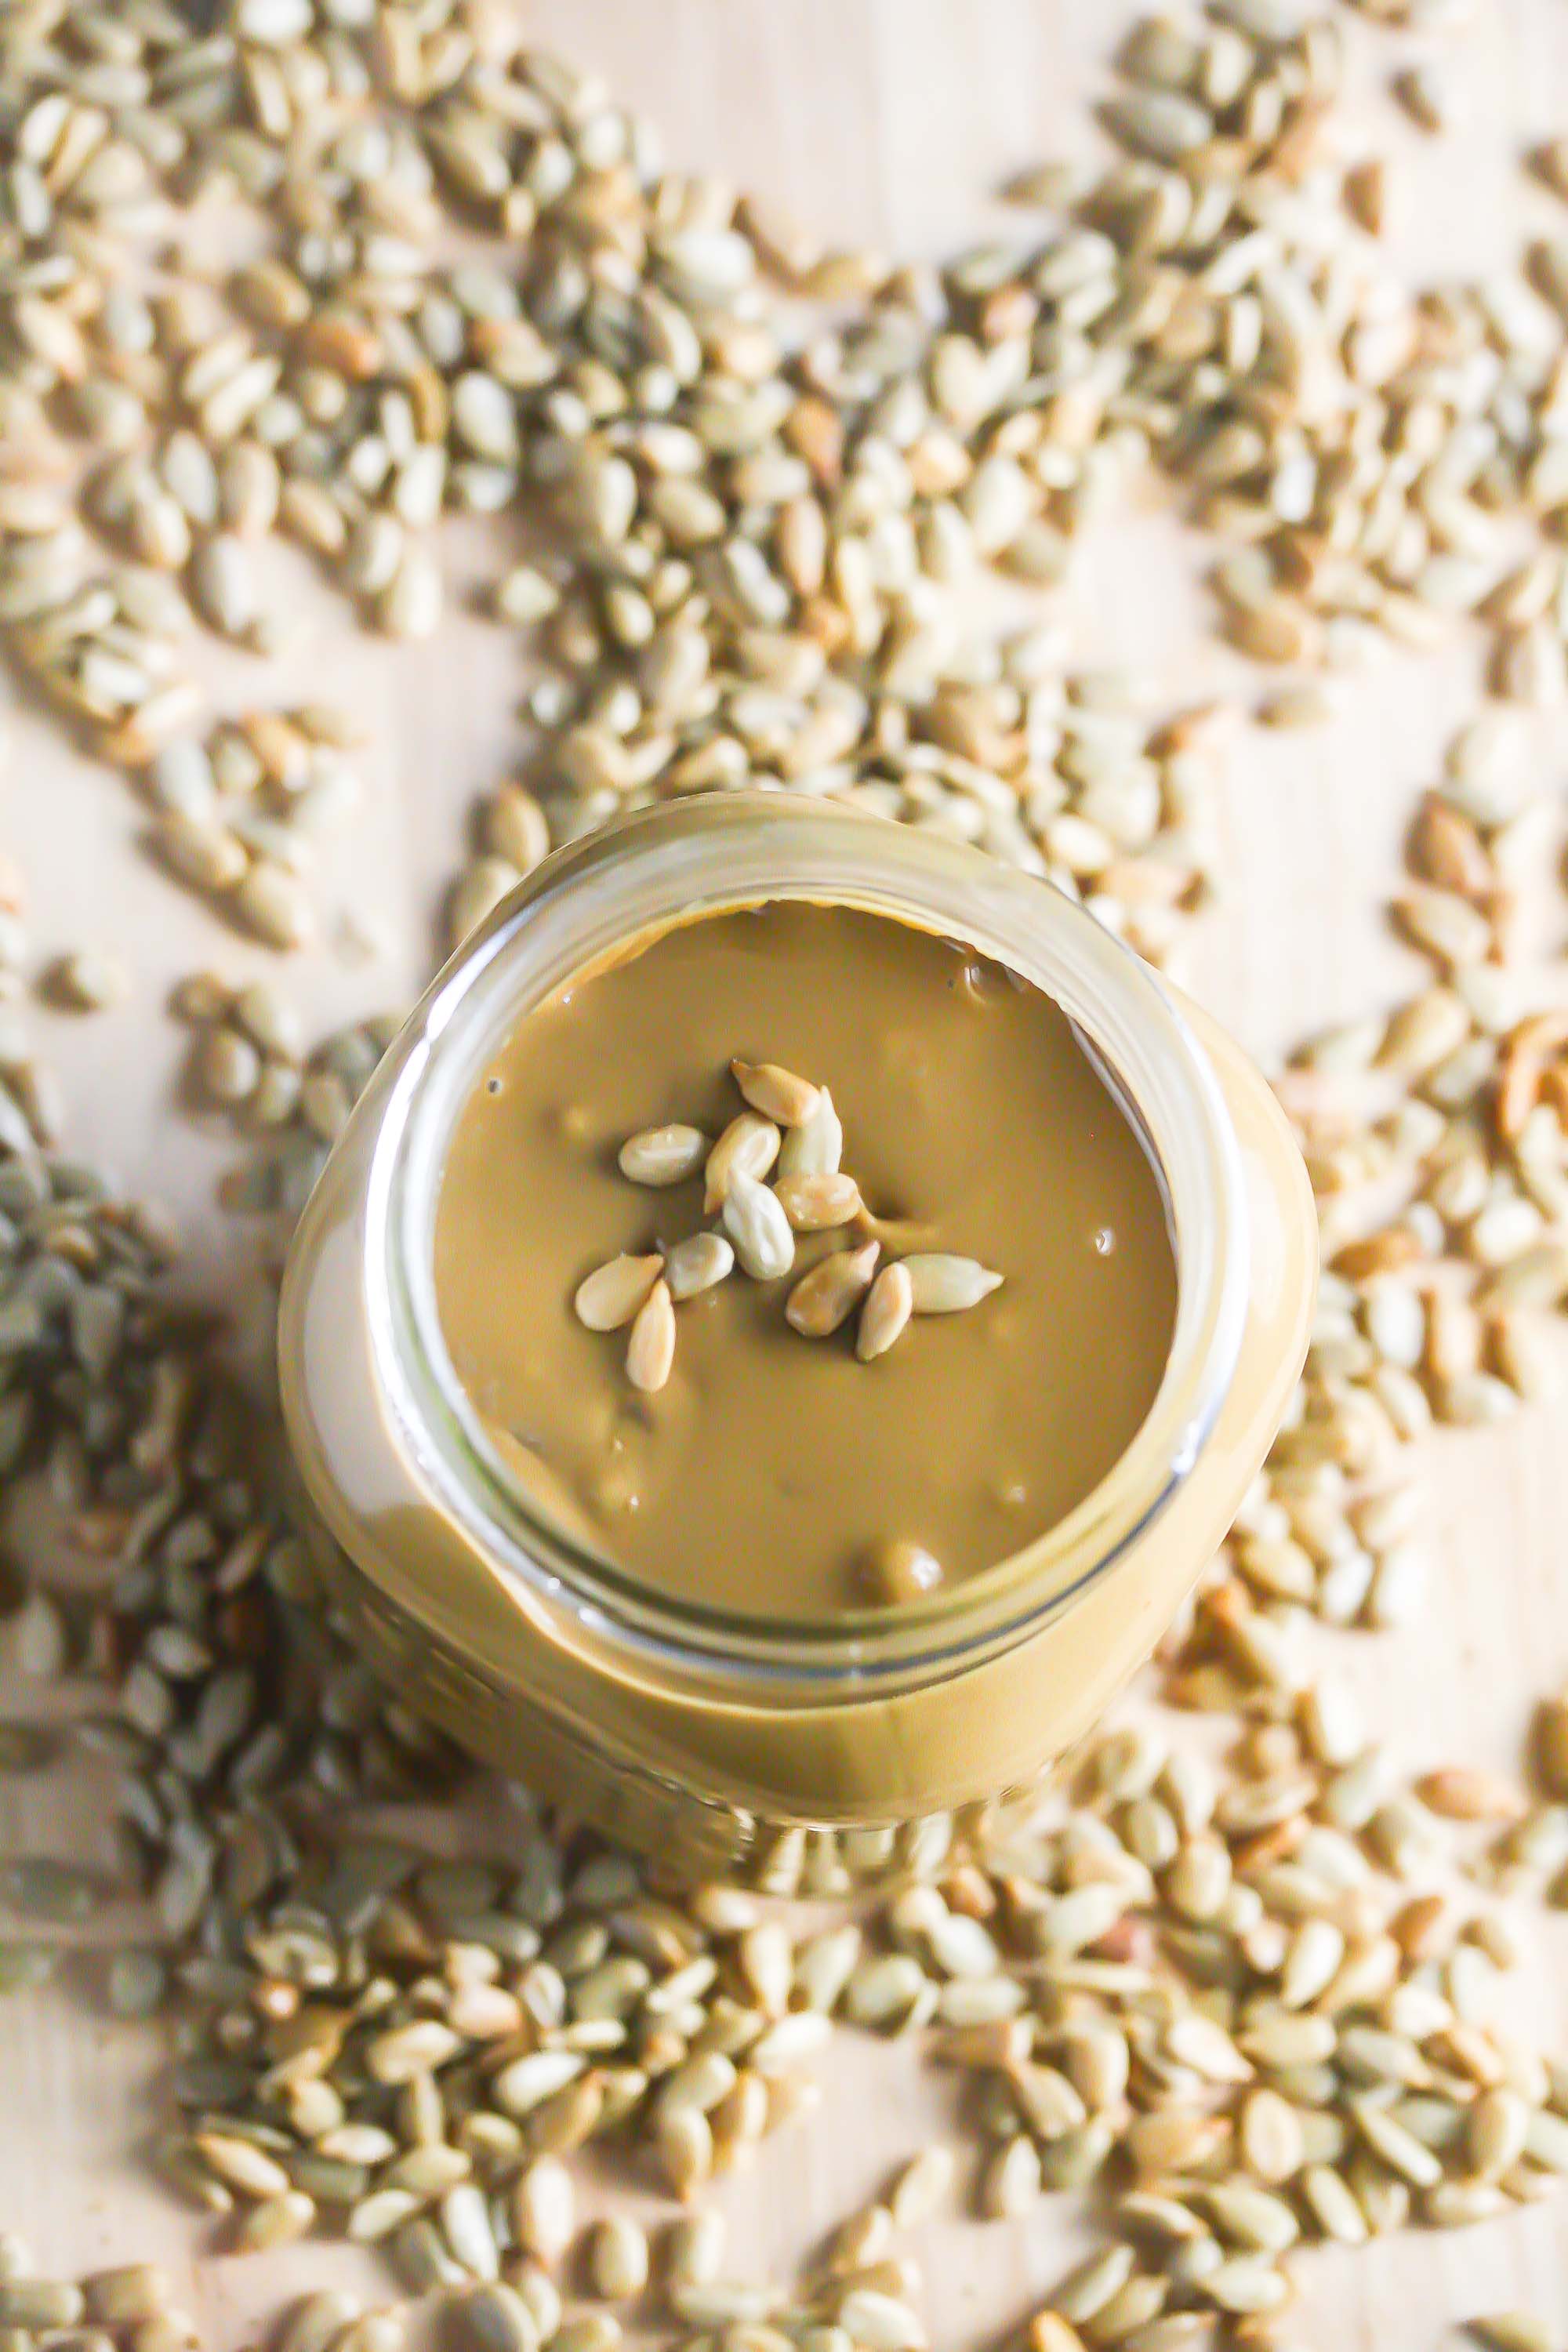 Overhead picture of Homemade Sunflower Seed Butter in a jar with scattered sunflower seeds around it.